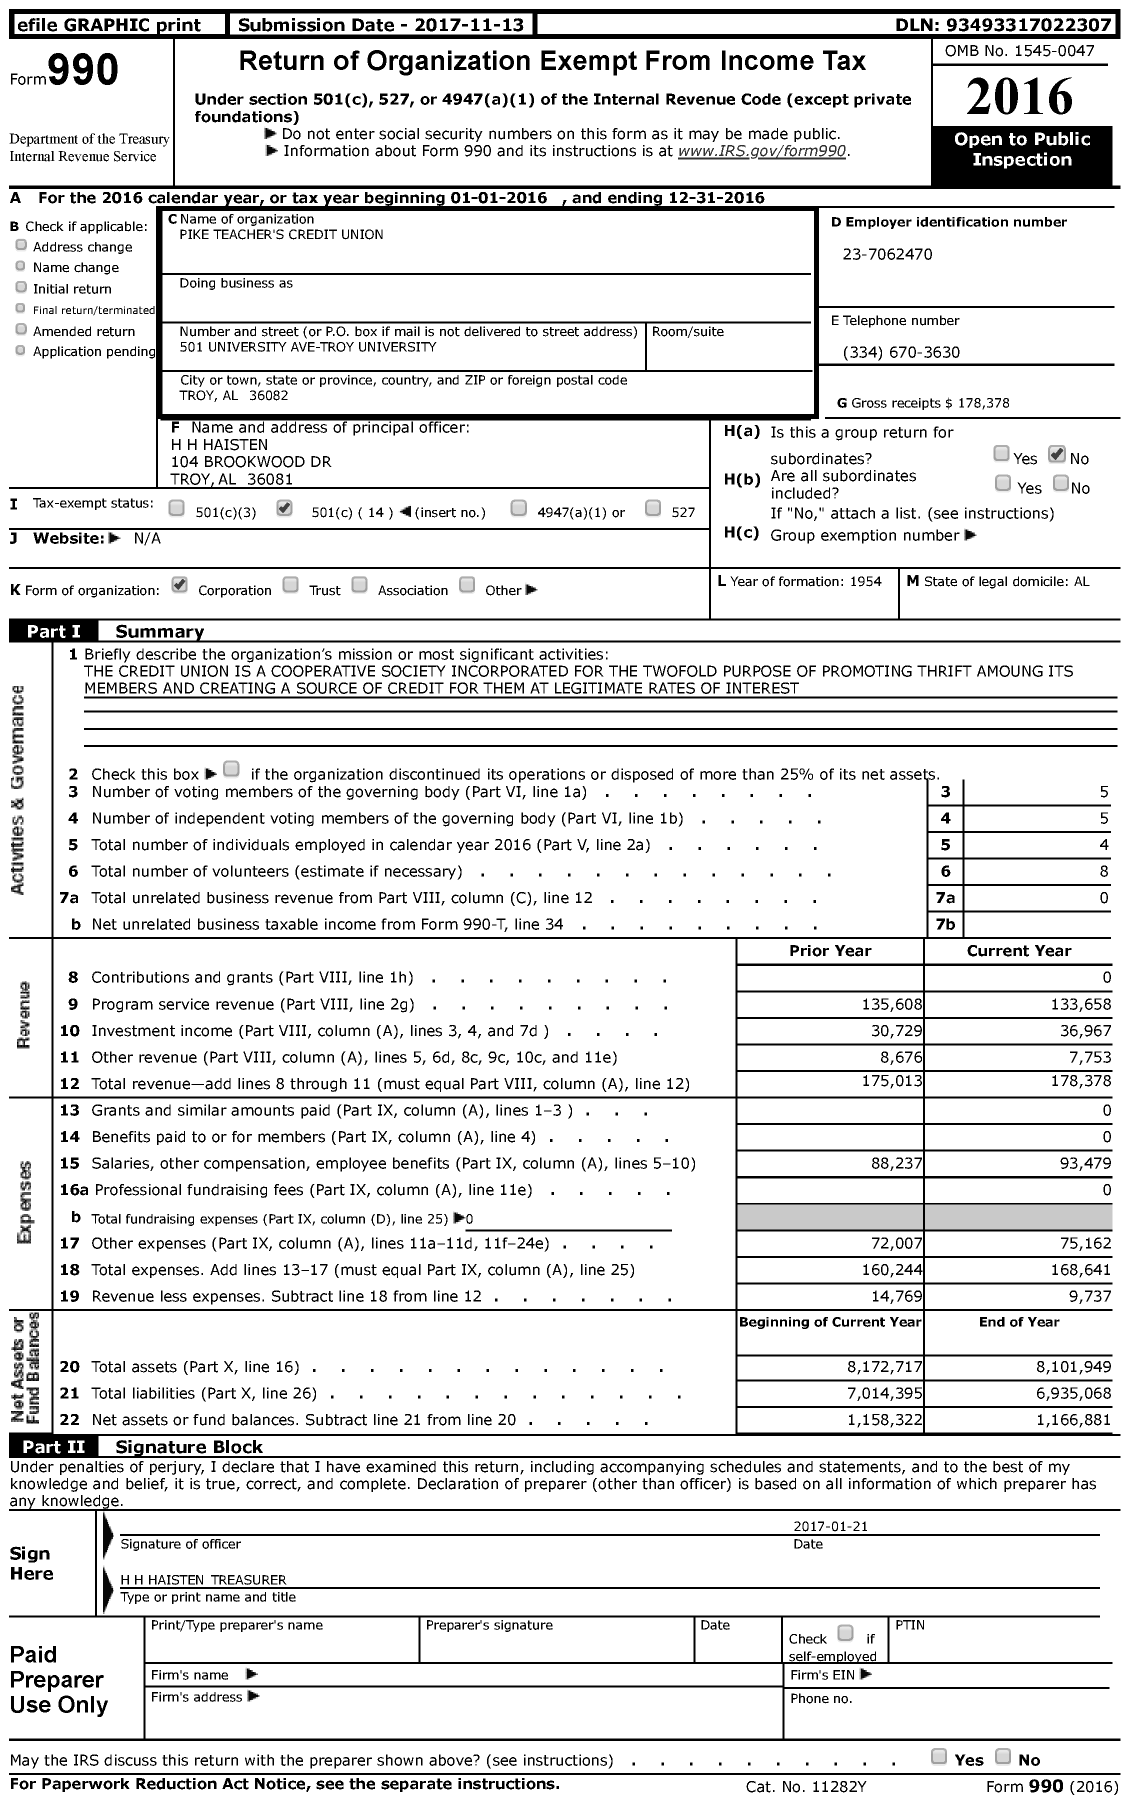 Image of first page of 2016 Form 990 for Pike Teacher's Credit Union